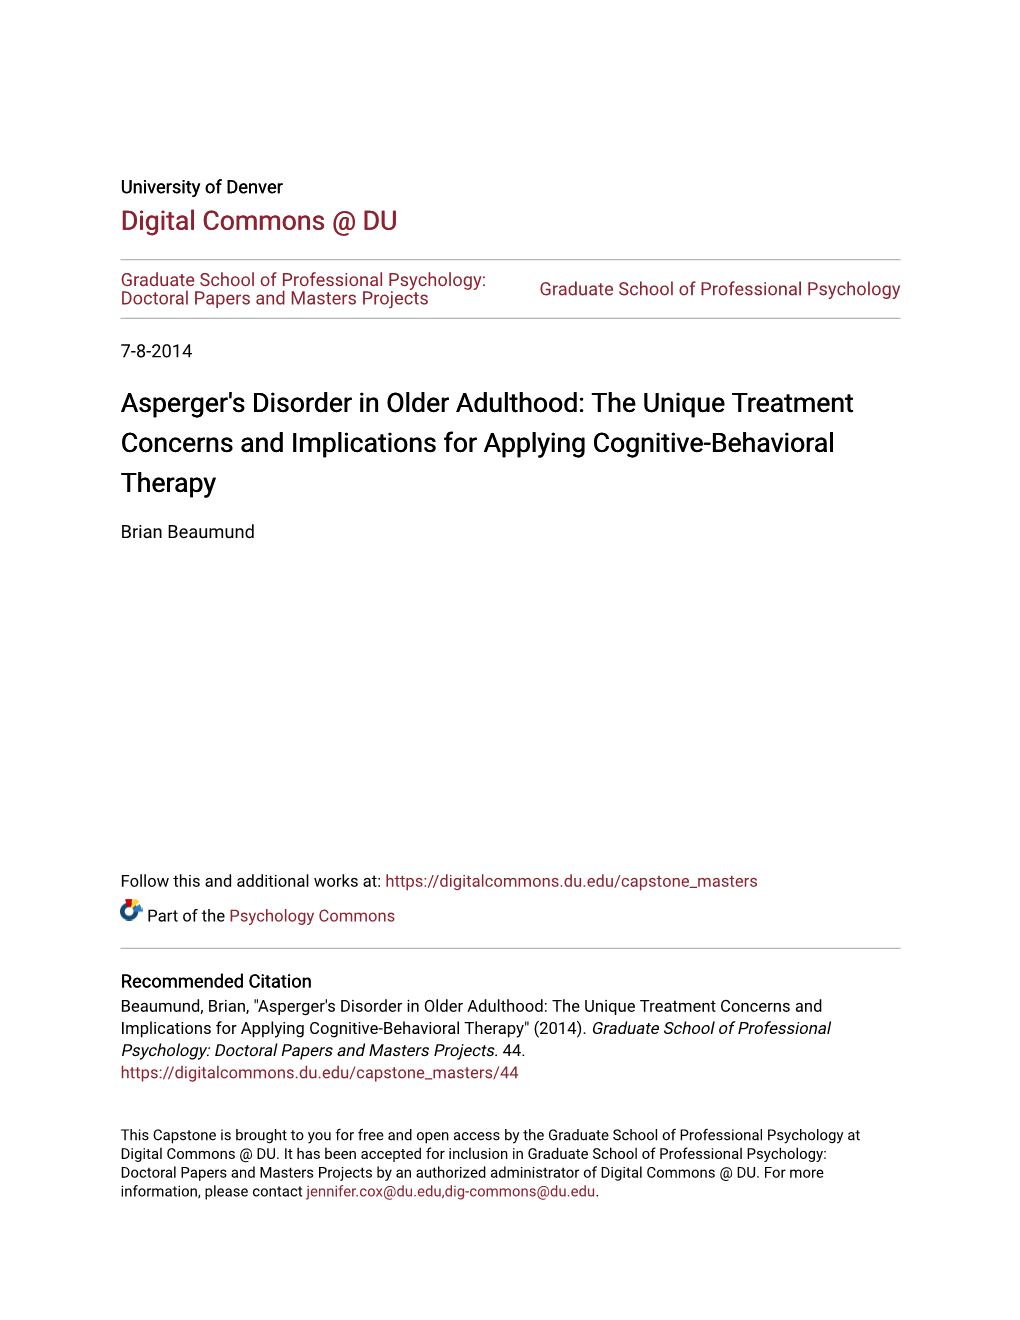 Asperger's Disorder in Older Adulthood: the Unique Treatment Concerns and Implications for Applying Cognitive-Behavioral Therapy